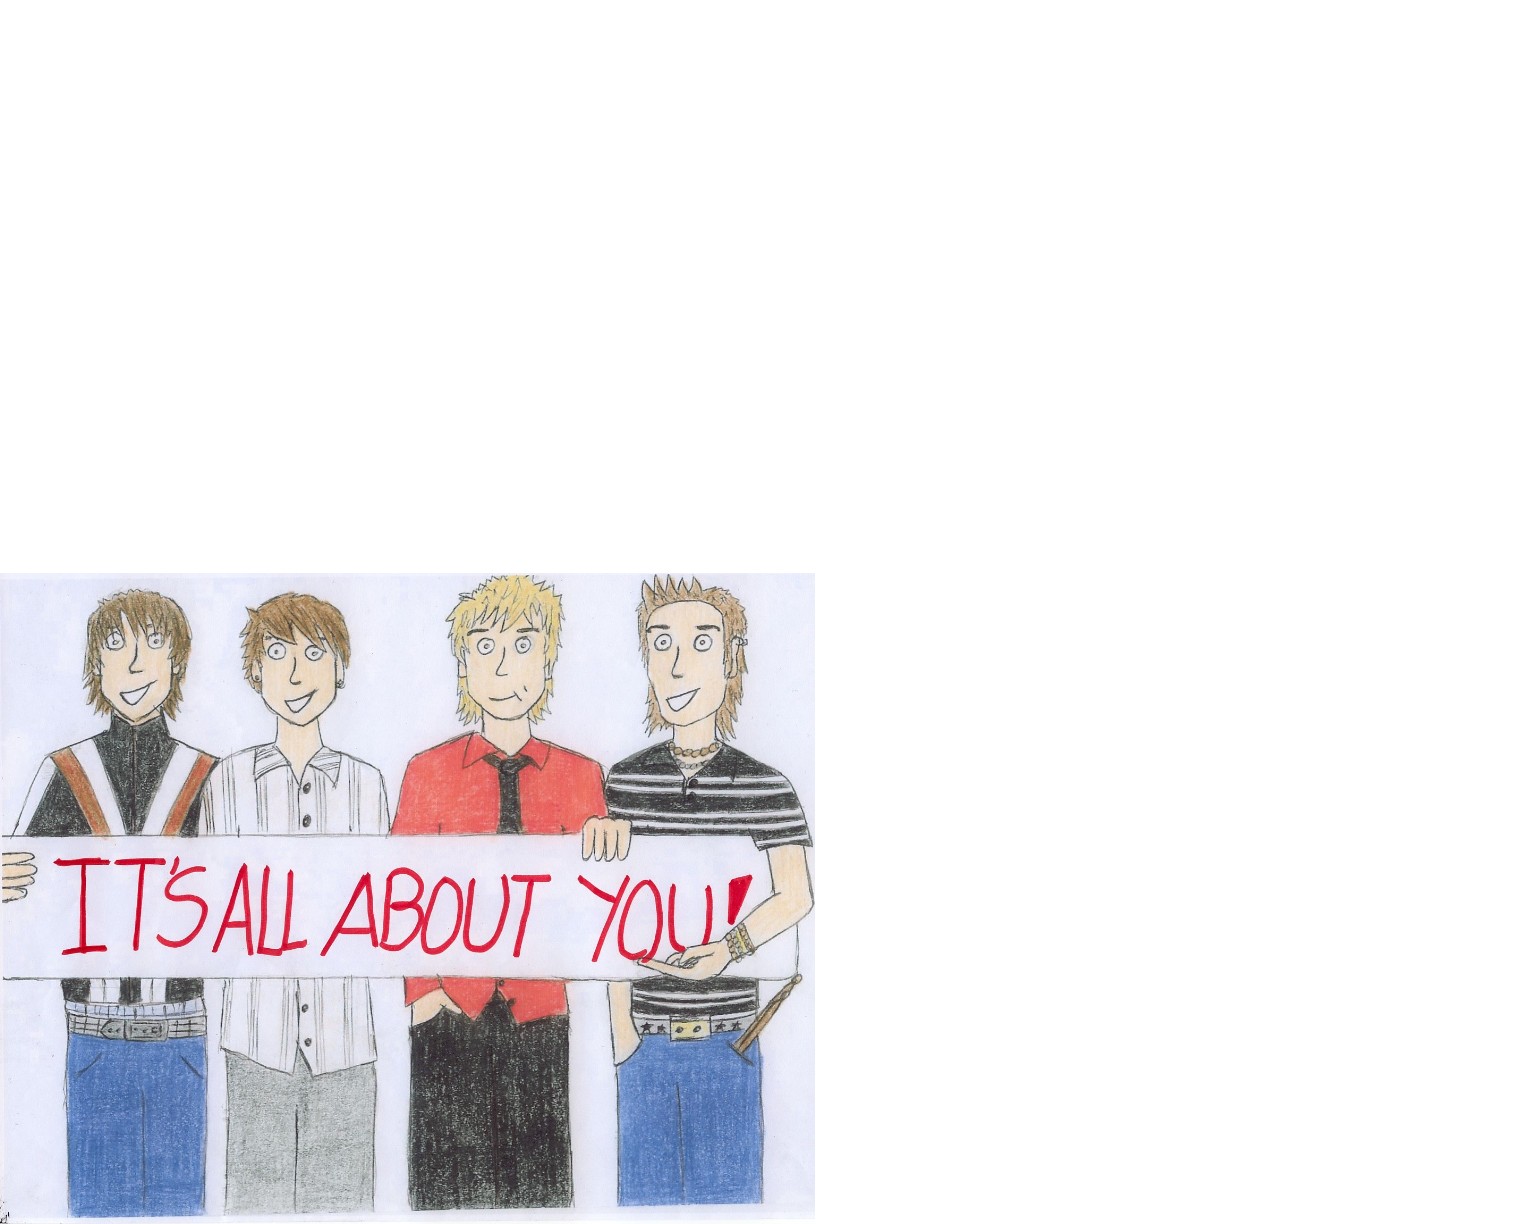 Mcfly- all about you! by crazybasketcaseloonyfreak